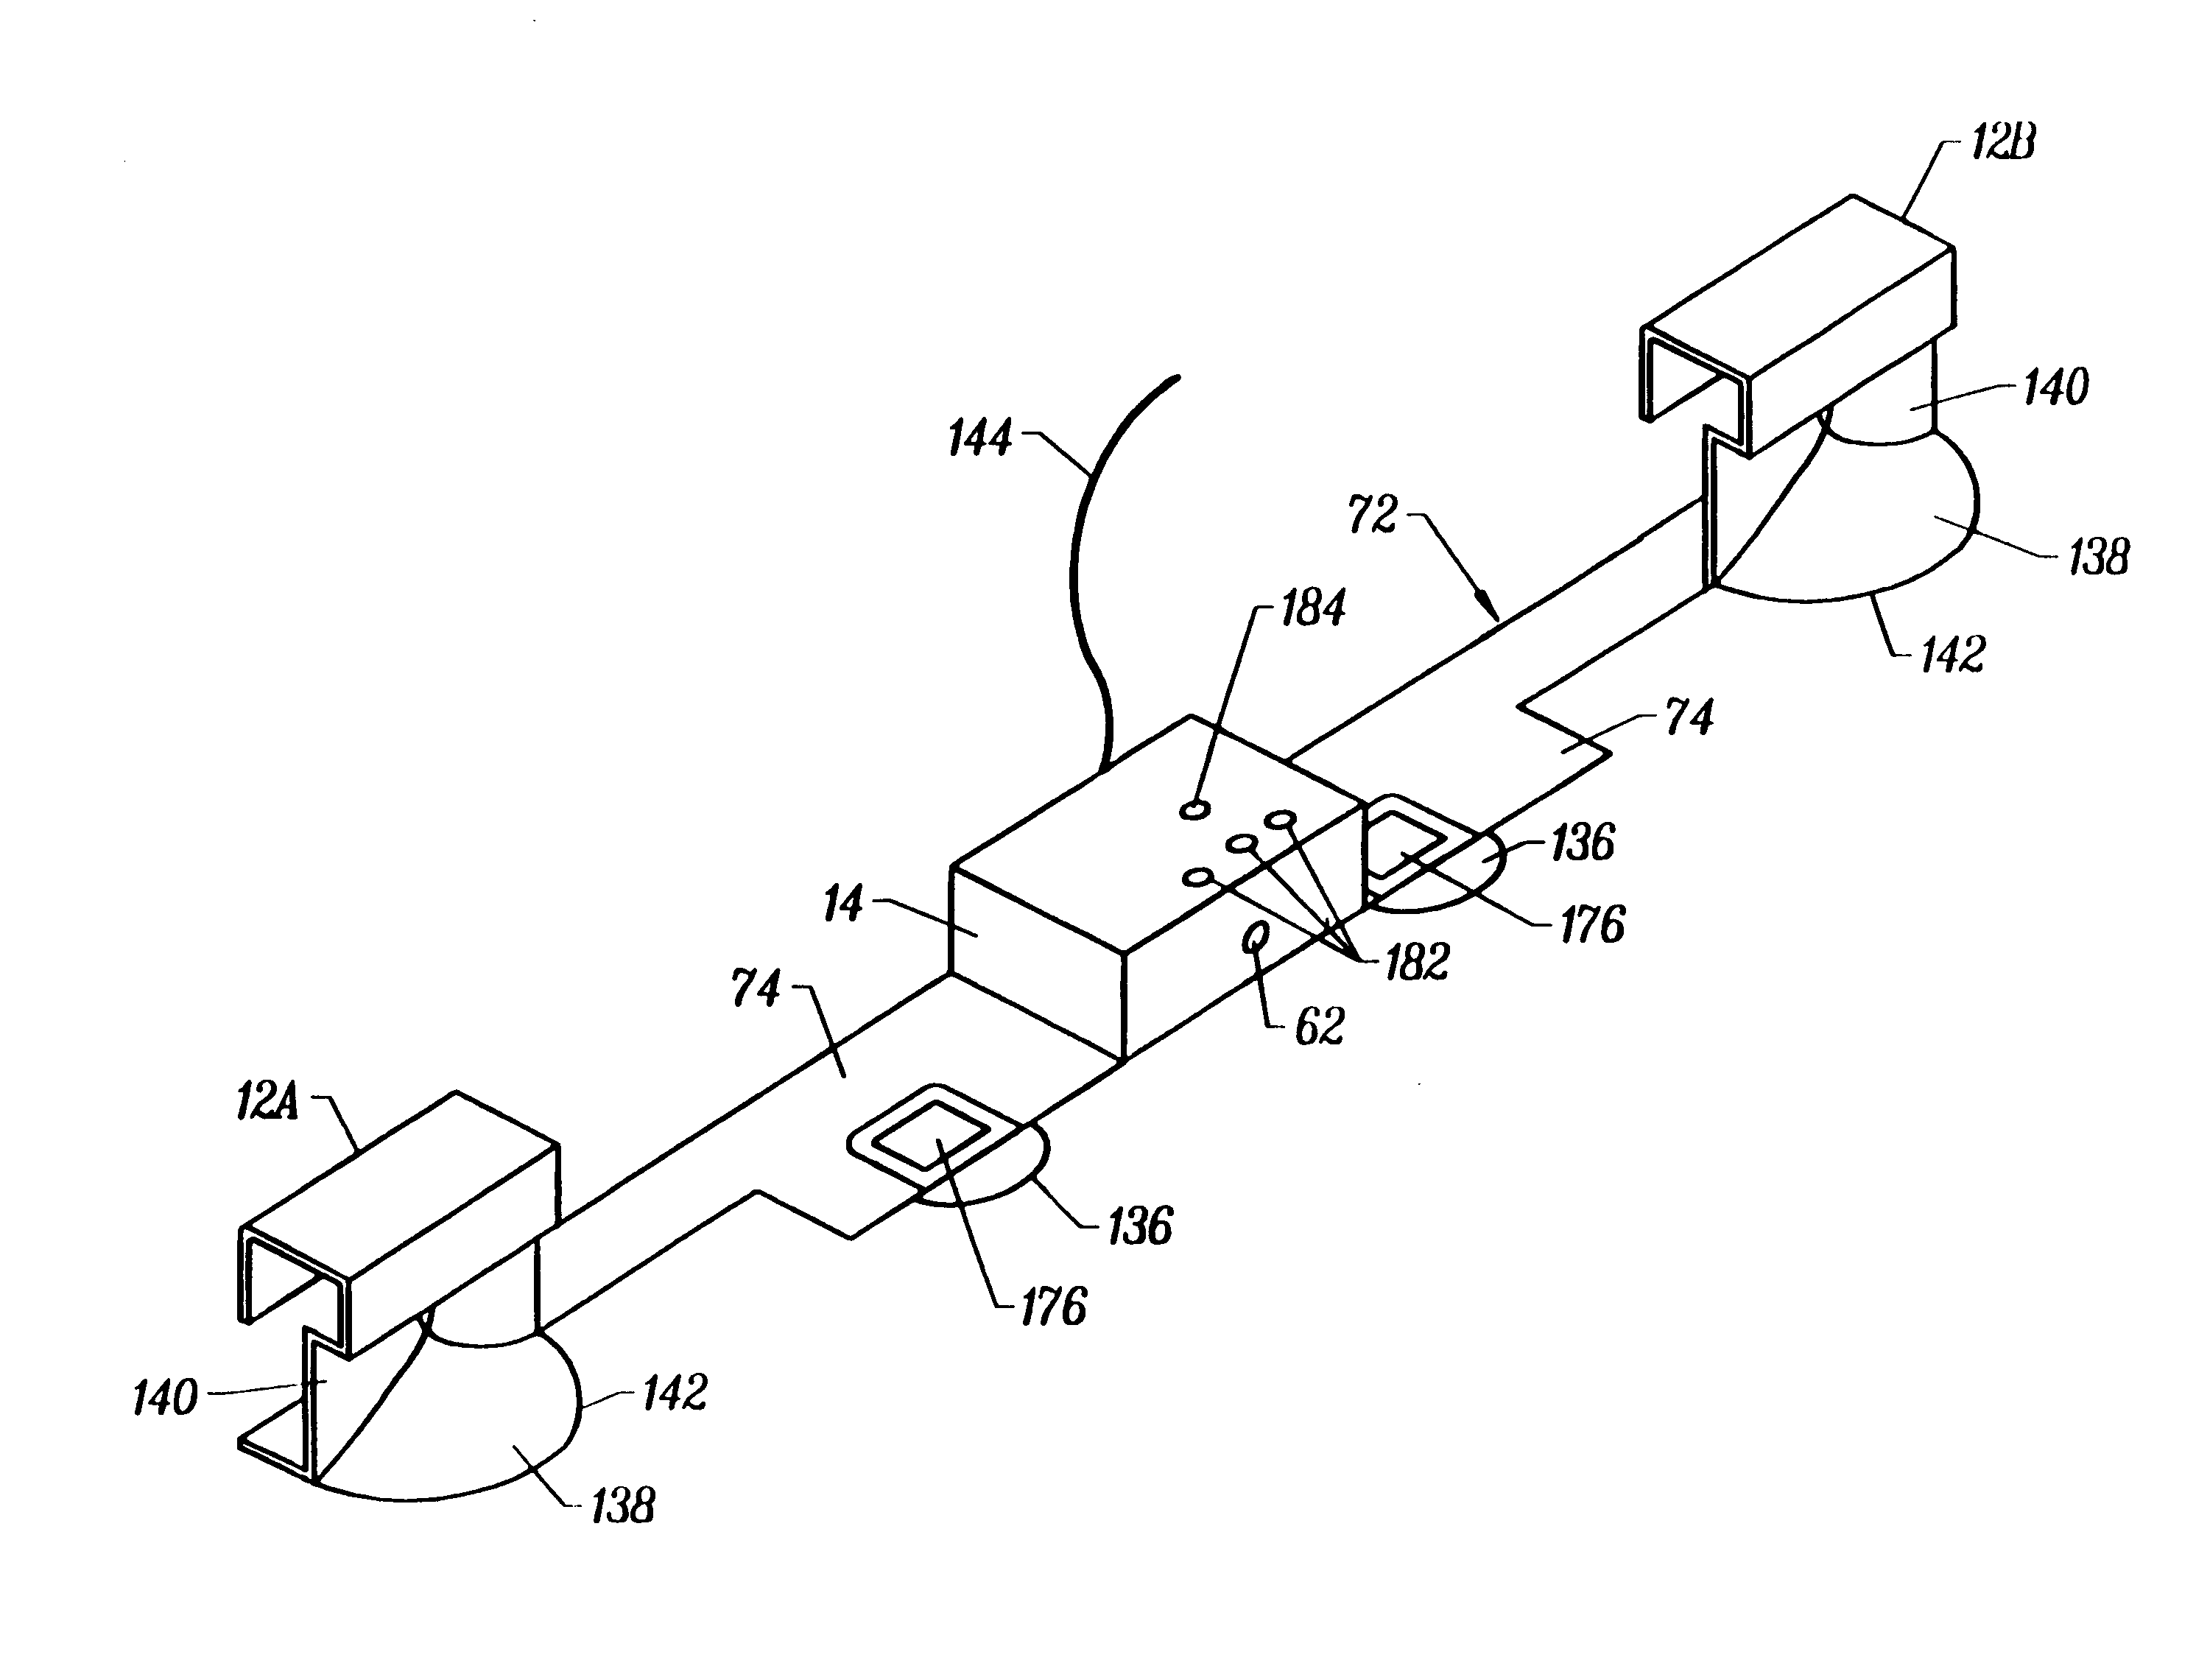 Detector assembly for use in a transcription system